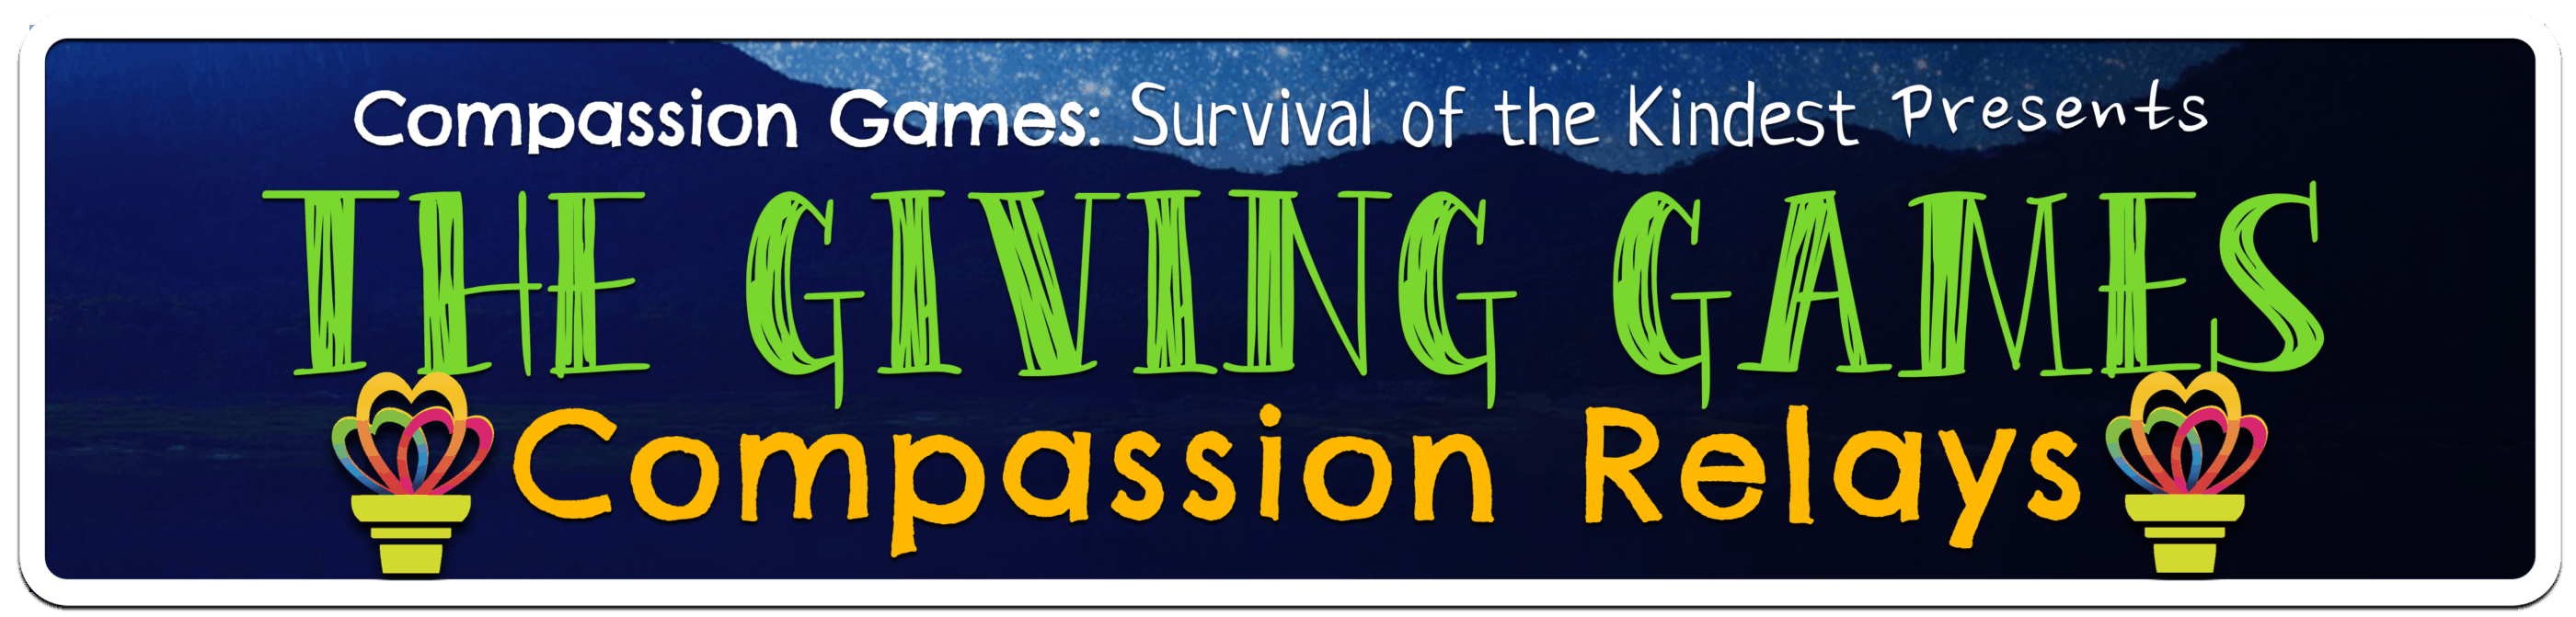 compassion-relays-banner-giving-games-updated-nov1